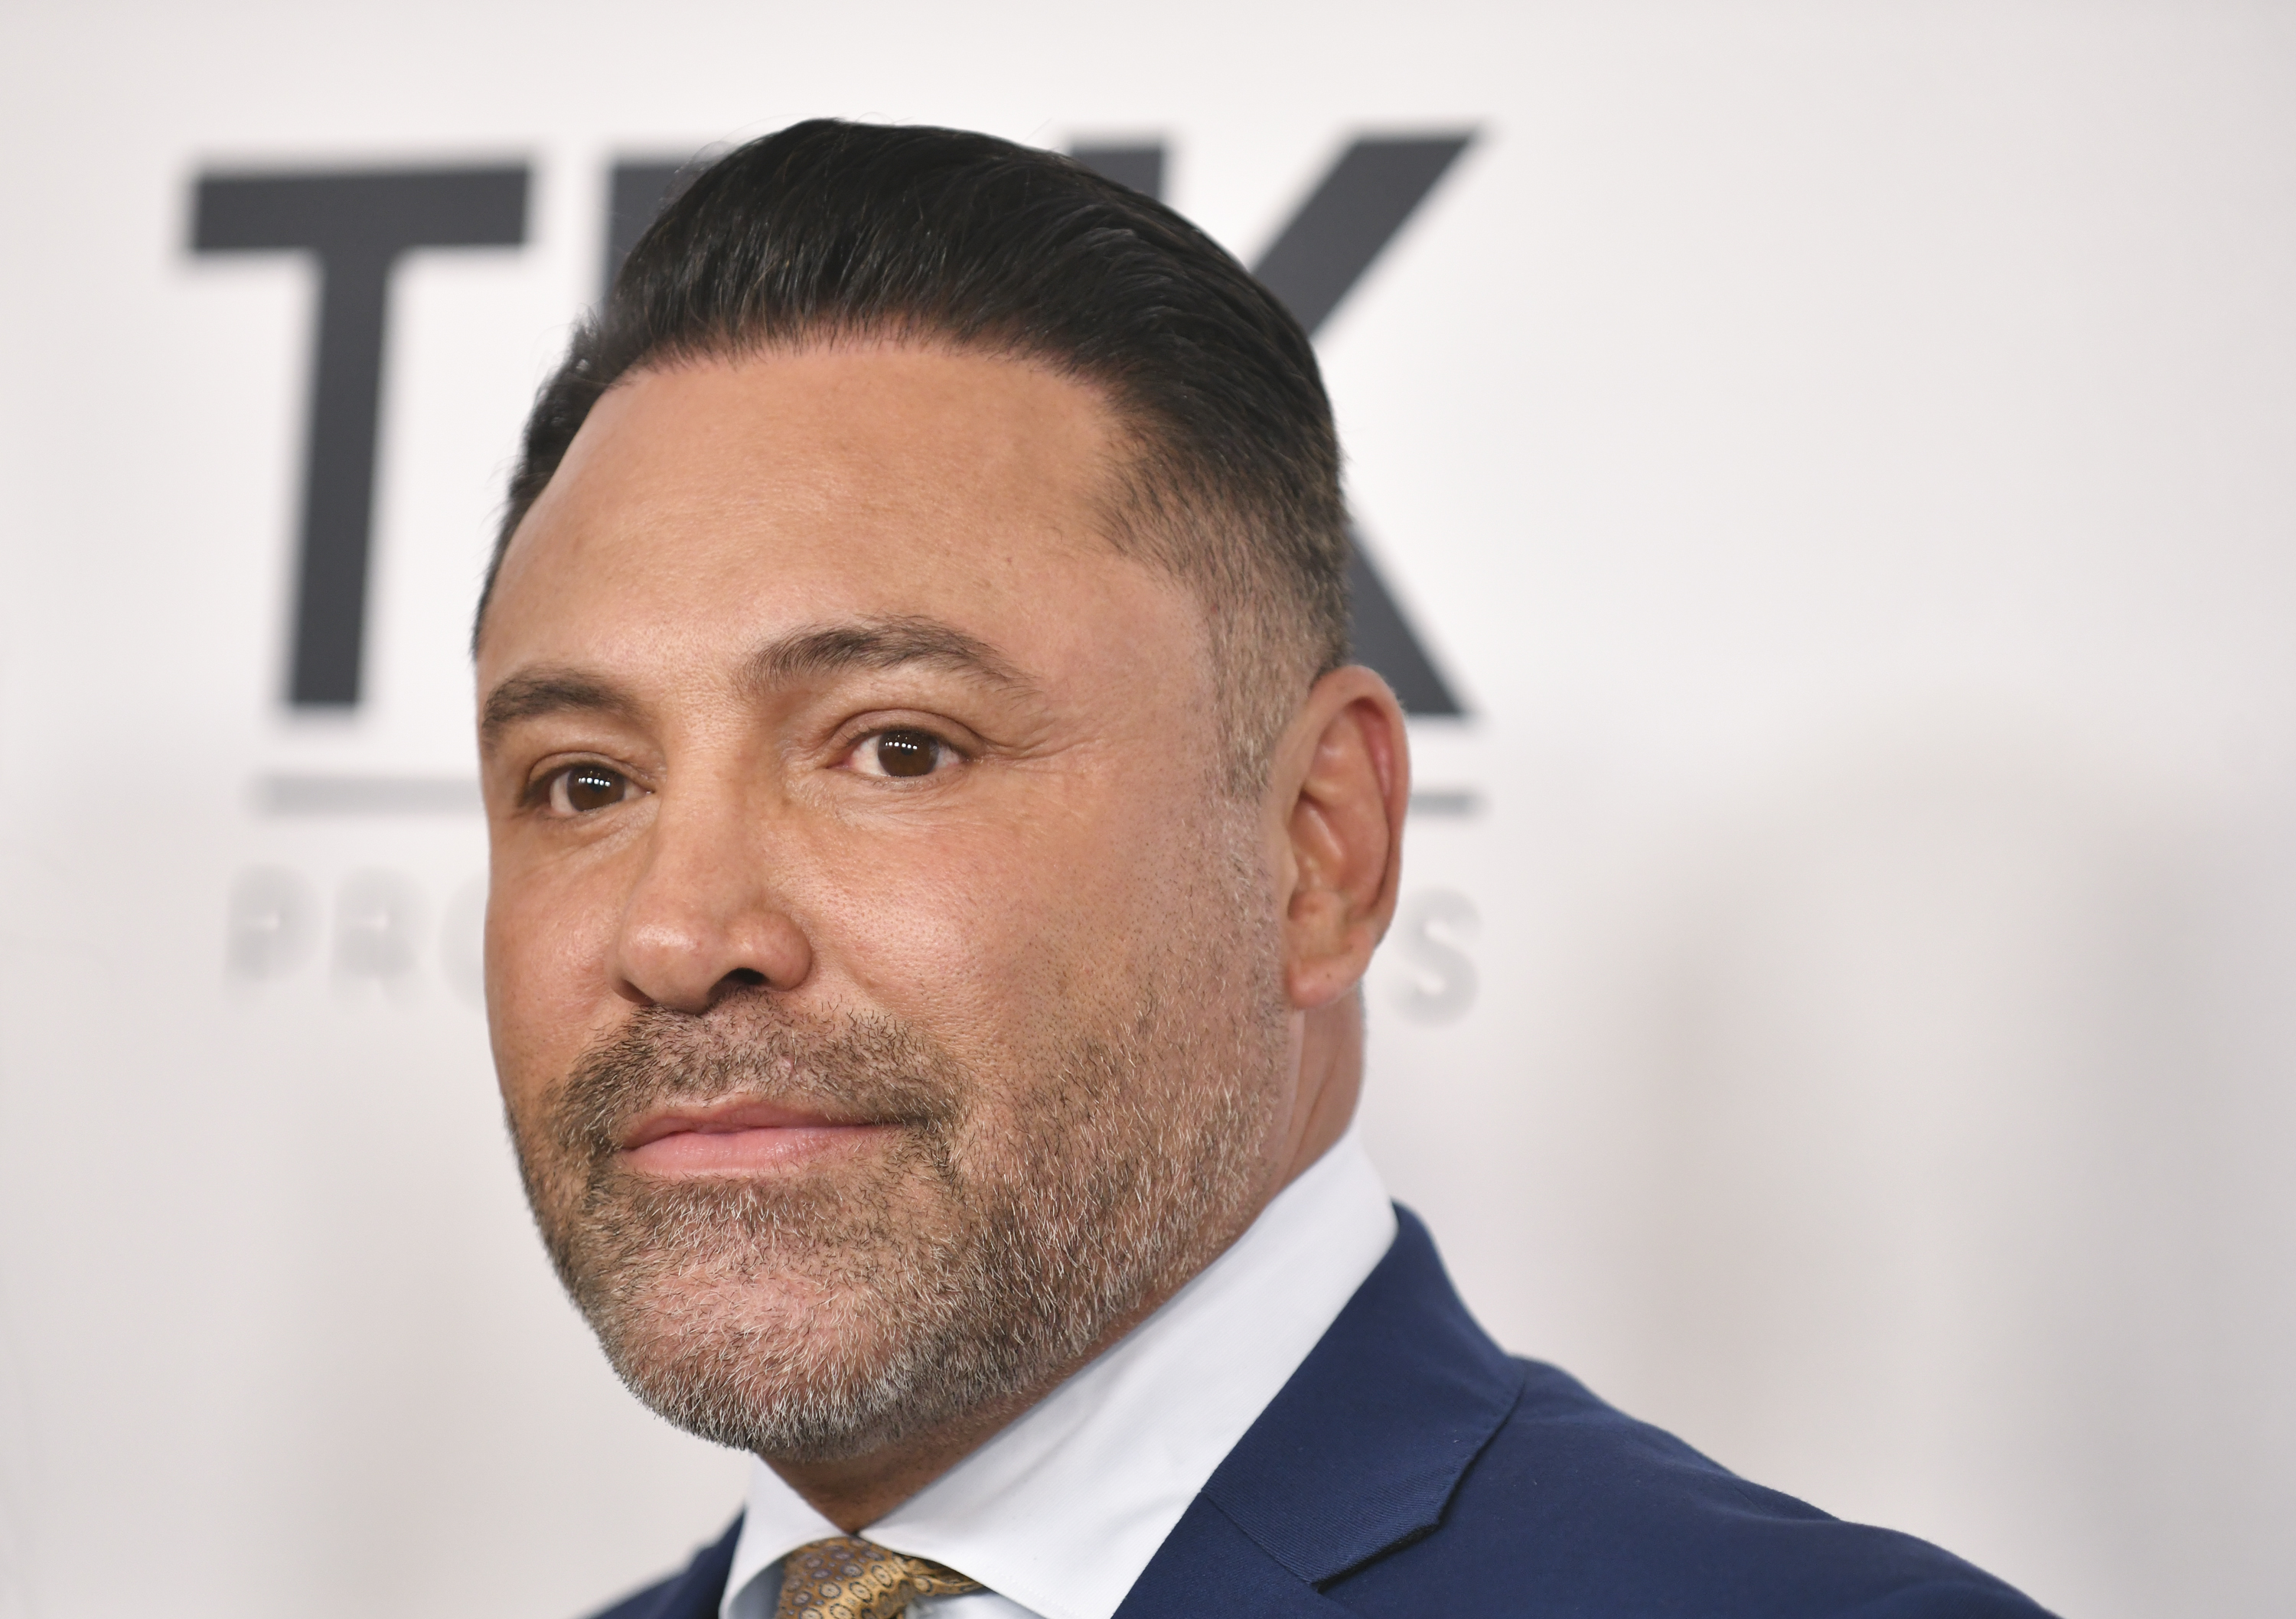 Oscar De La Hoya calls out PBC’s head man for being an issue in the sport.